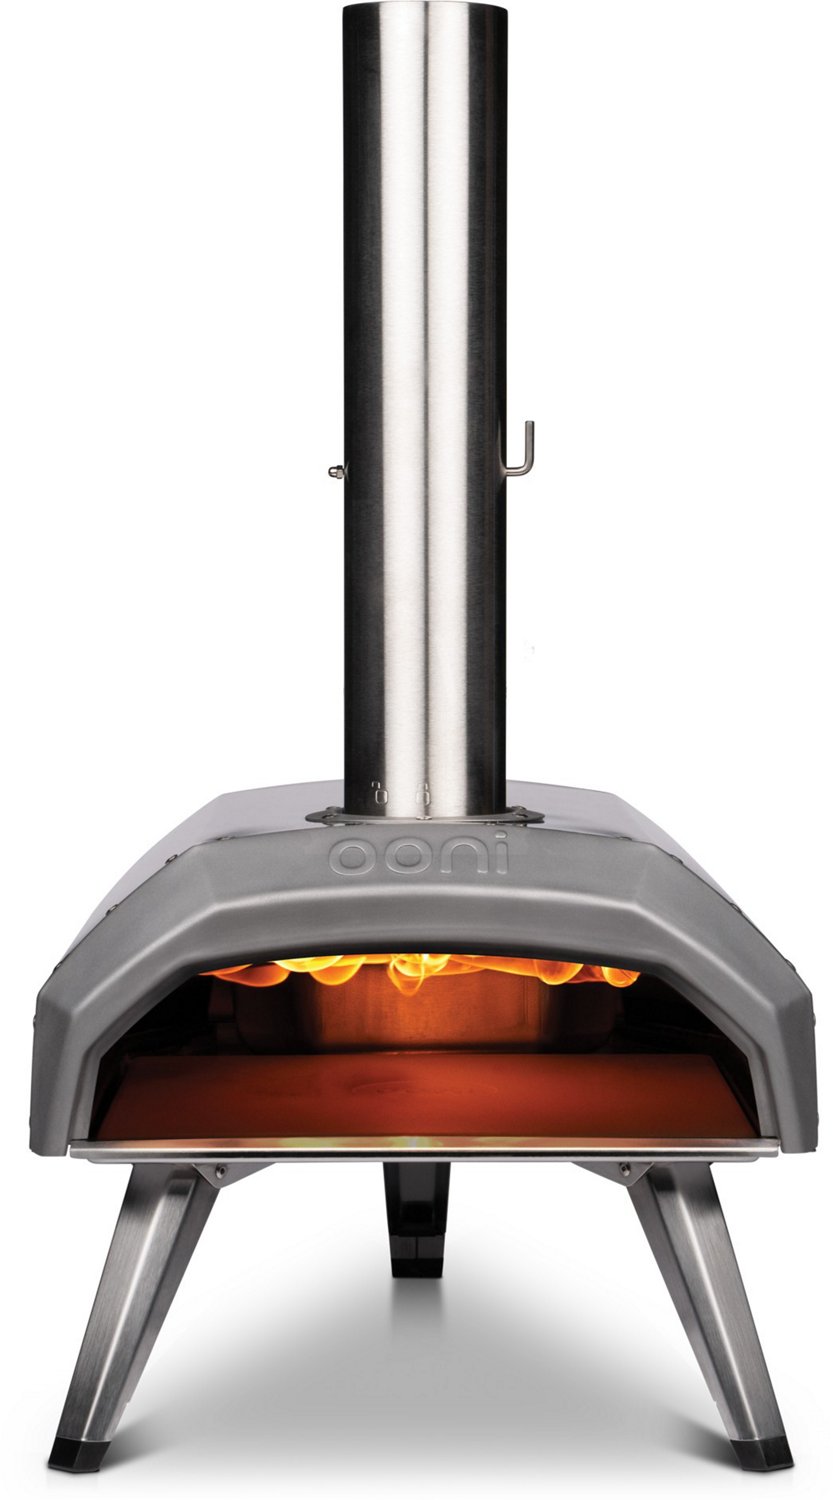 Ooni 3 Portable Wood-Fired Outdoor Pizza Oven — Tools and Toys